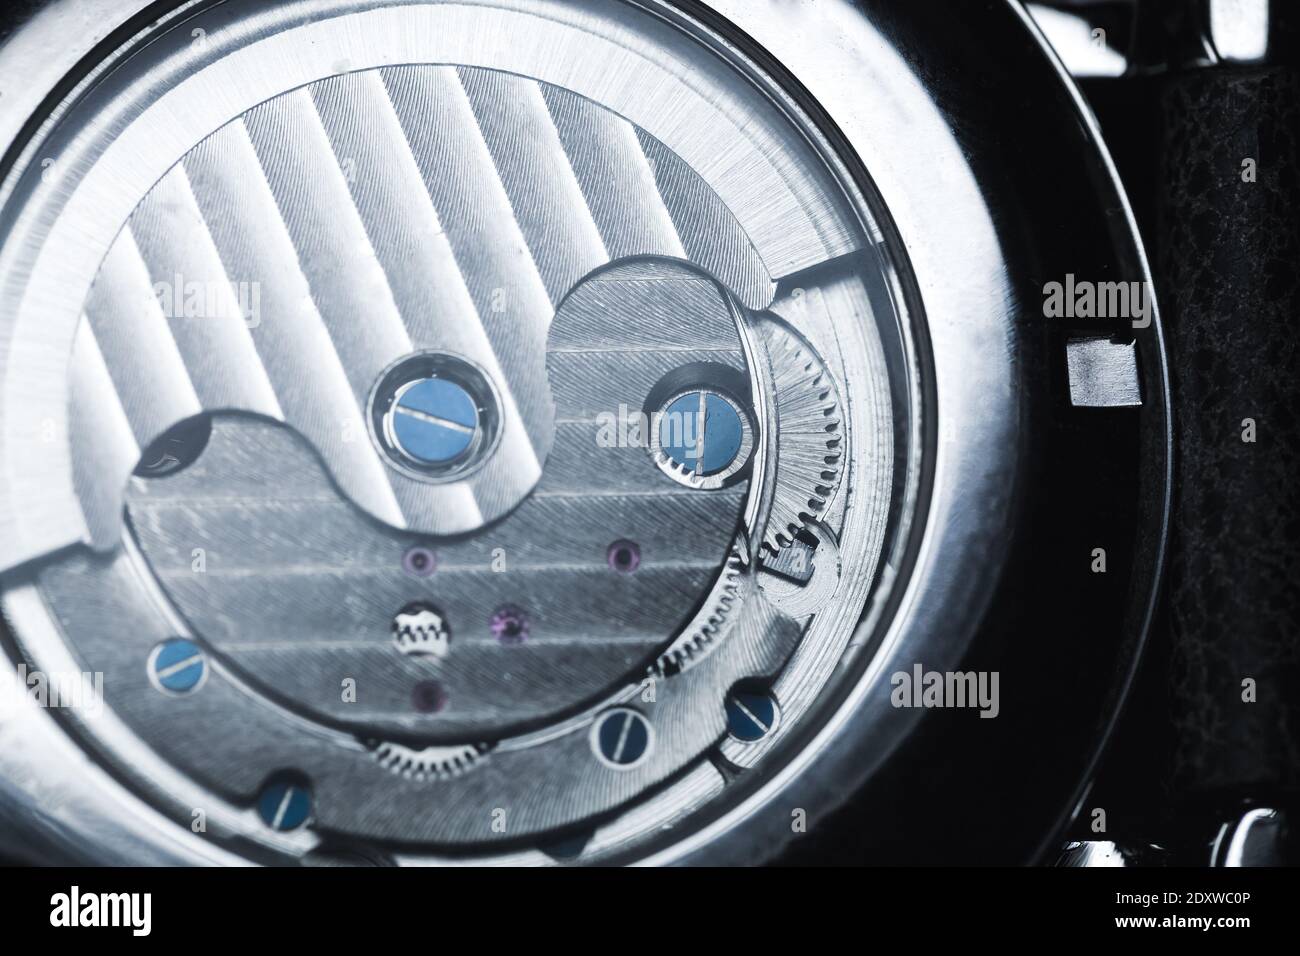 Back side of a mechanical luxury men wrist watch with automatic winding, close-up photo of self-winding mechanism details Stock Photo